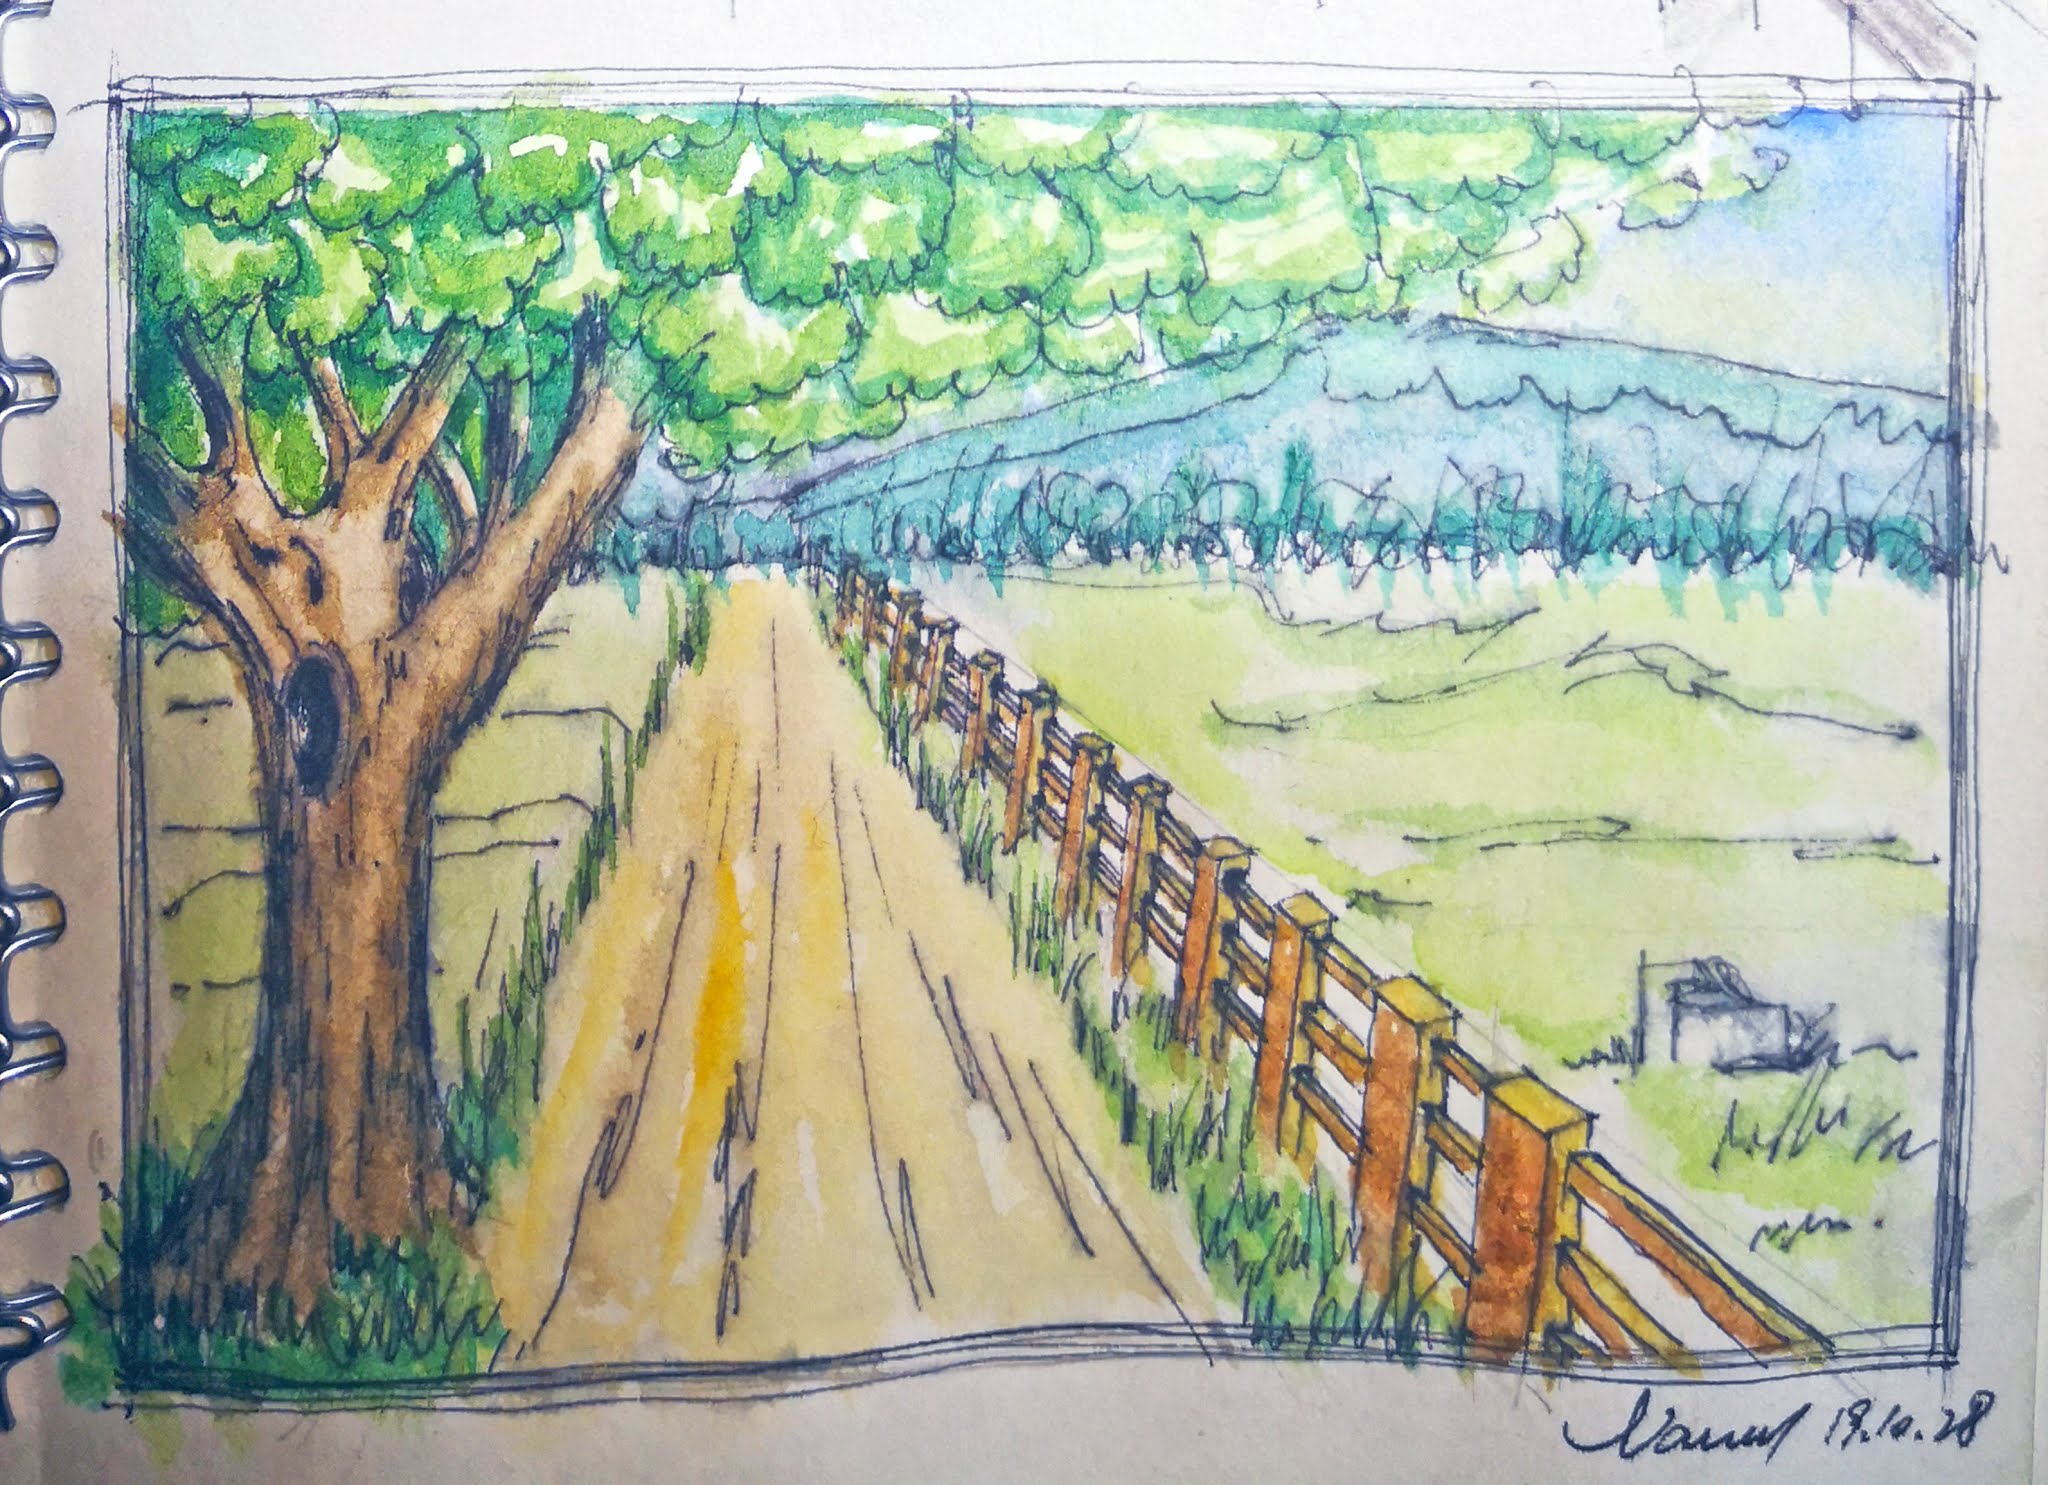 How To Draw A Fence In A farm Scene/skill & Watercolor